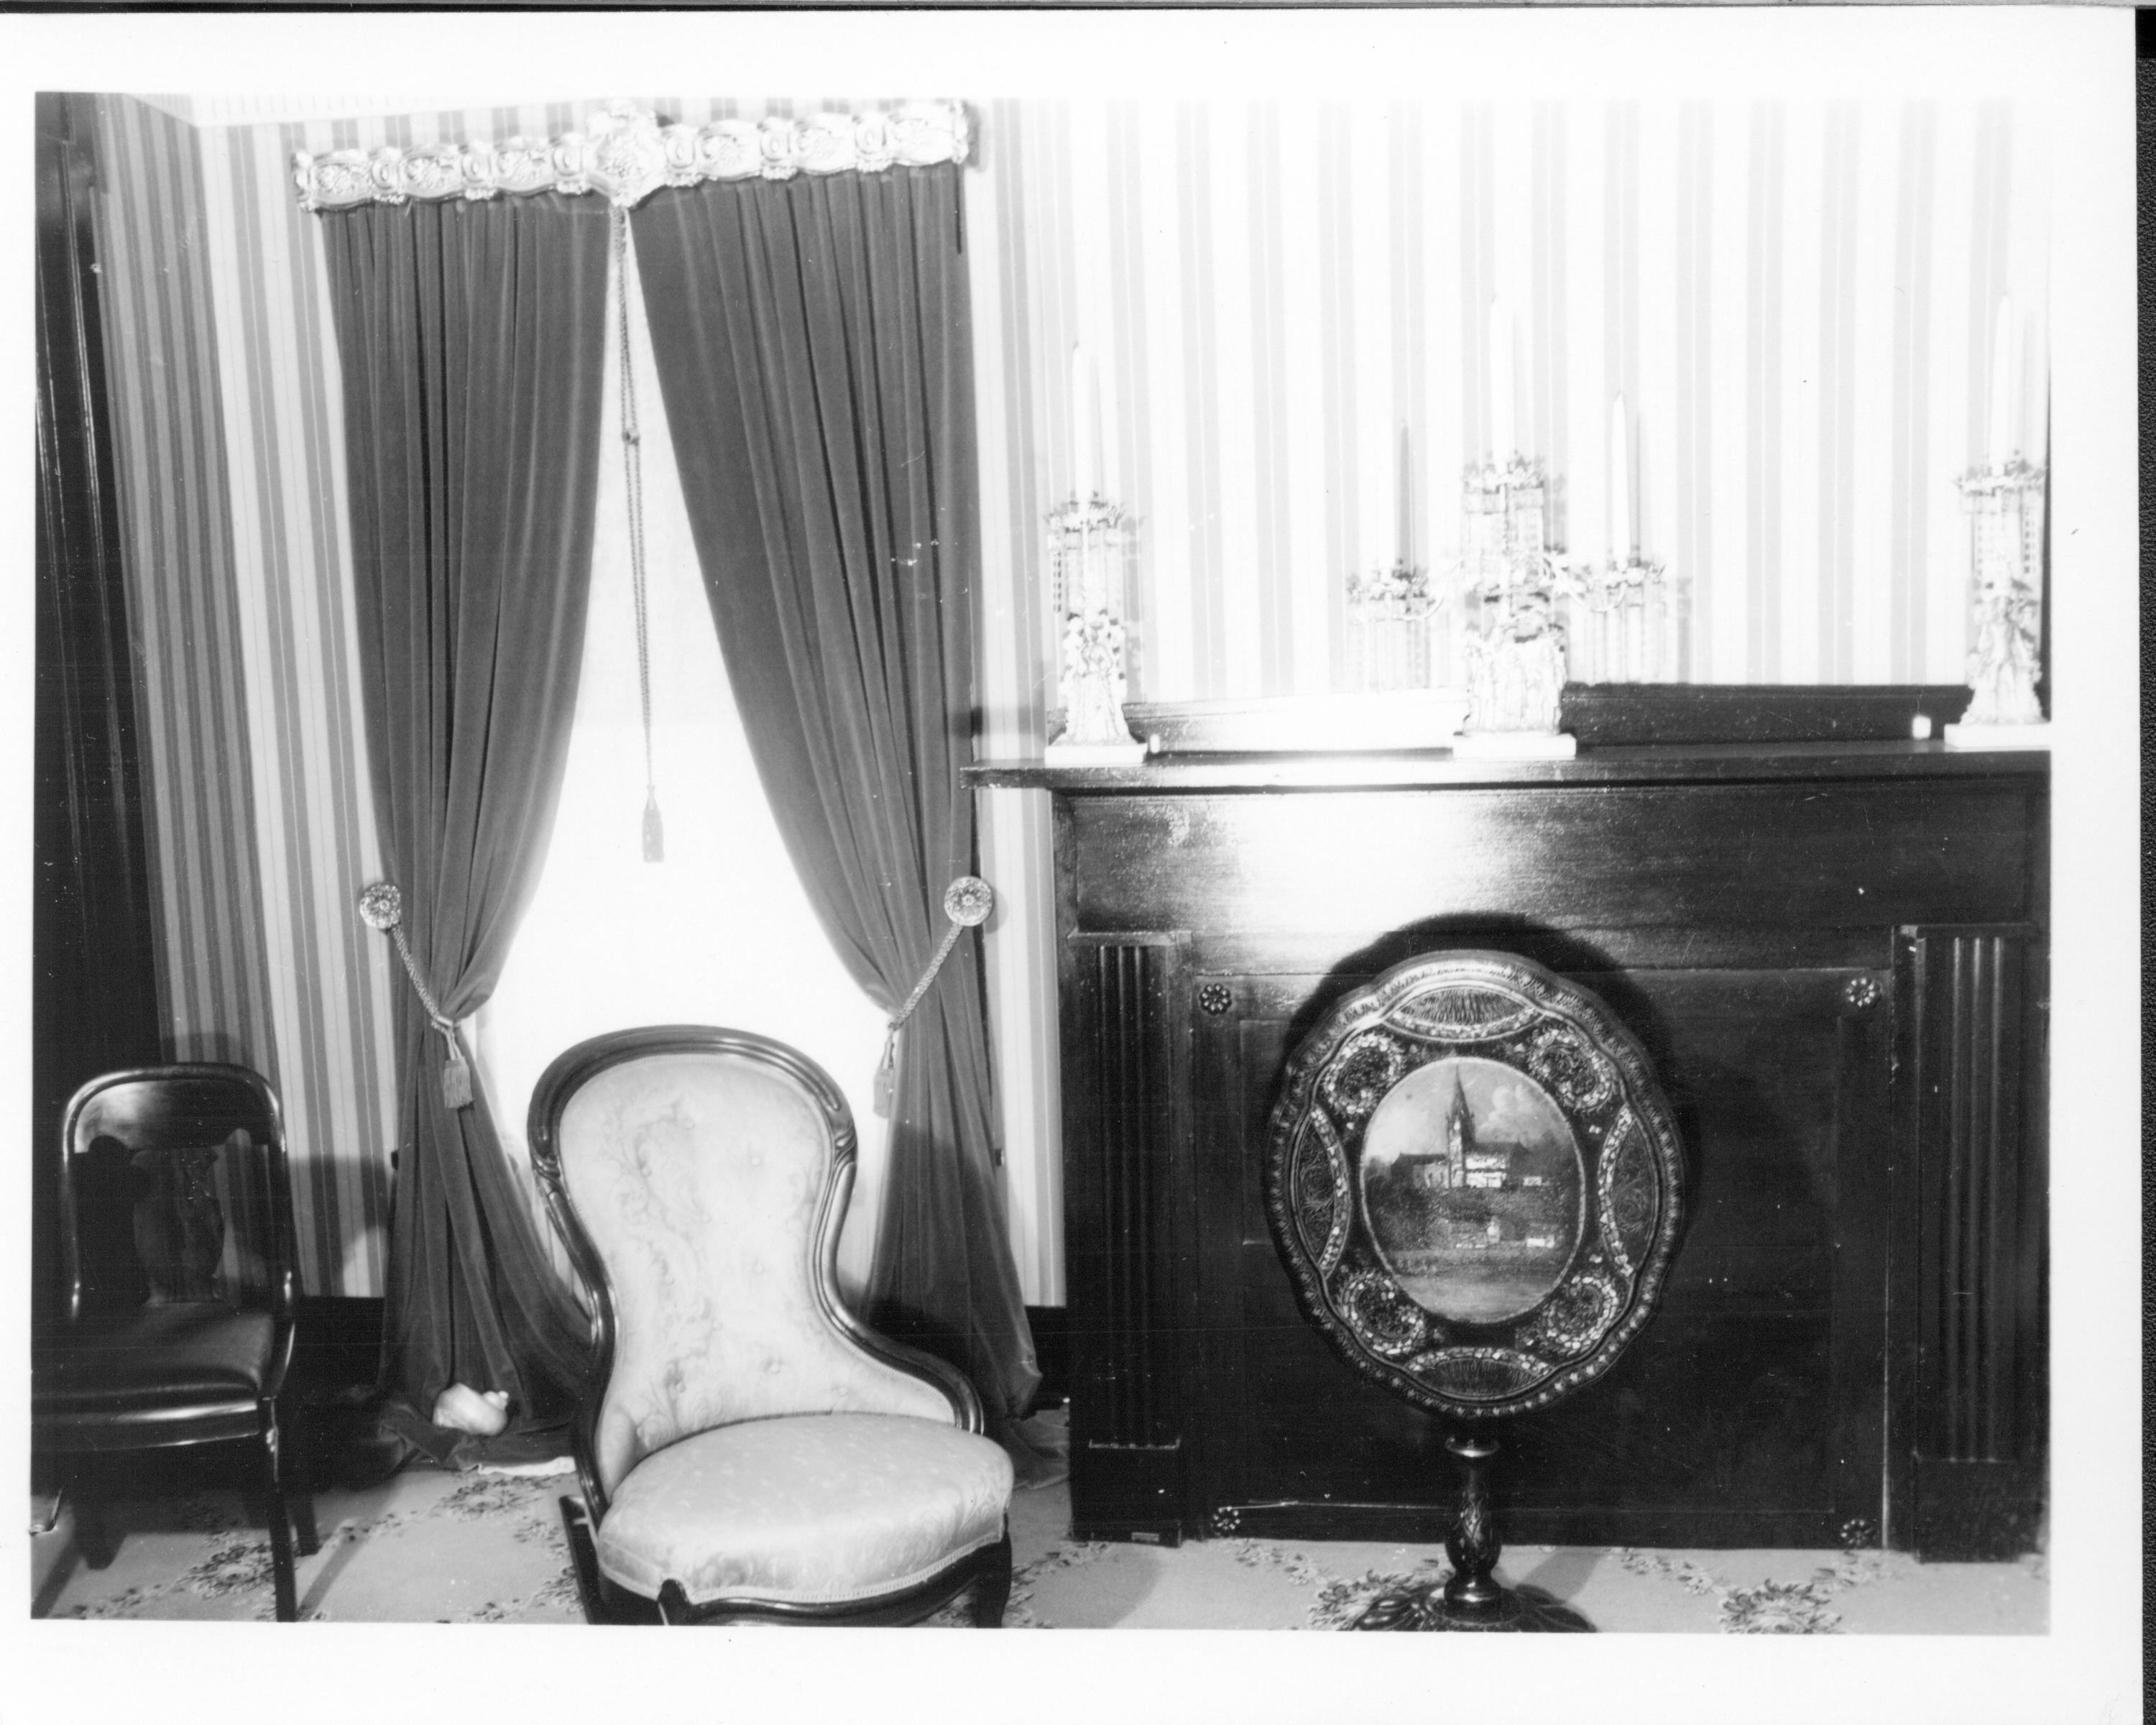 Rear Parlor - Lincoln Home neg.#55, class.#310 Lincoln, Home, Sitting, Room, Parlor